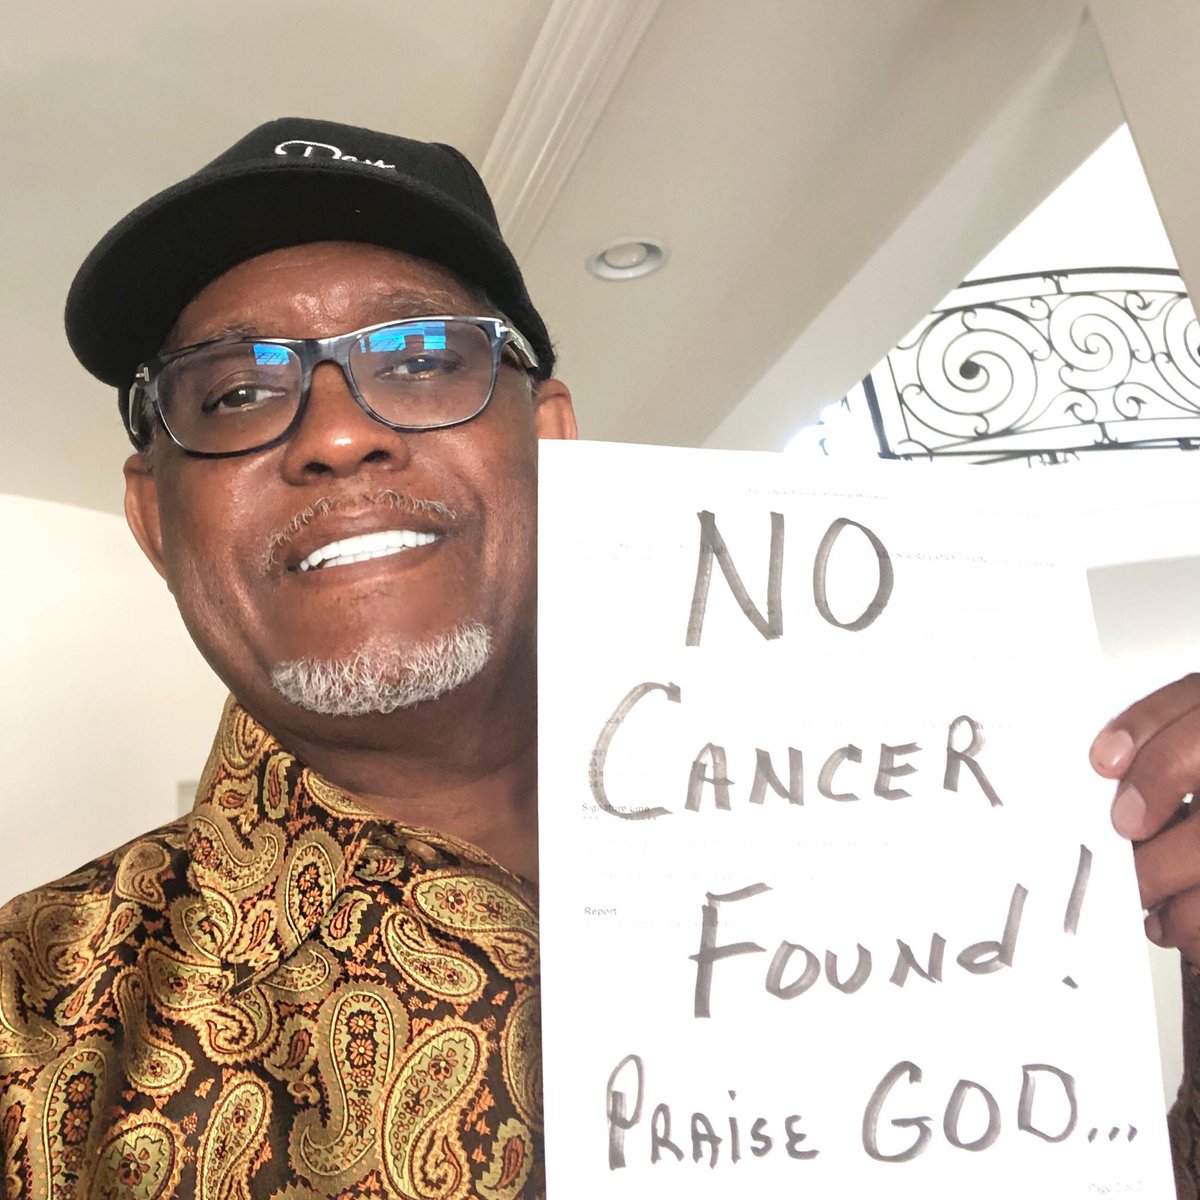 We r over joyed 2 say, we saw the doctors 4 the results of Gregg’s Pet Scan he took last week! Test show, WE ARE CANCER FREE! Yes God! Now i can go give Gregg a black eye 👊🏾 since so many thinks he’s abused #fuckcancer #fuckopinions #cancersurvivor #pushthrucaretakers